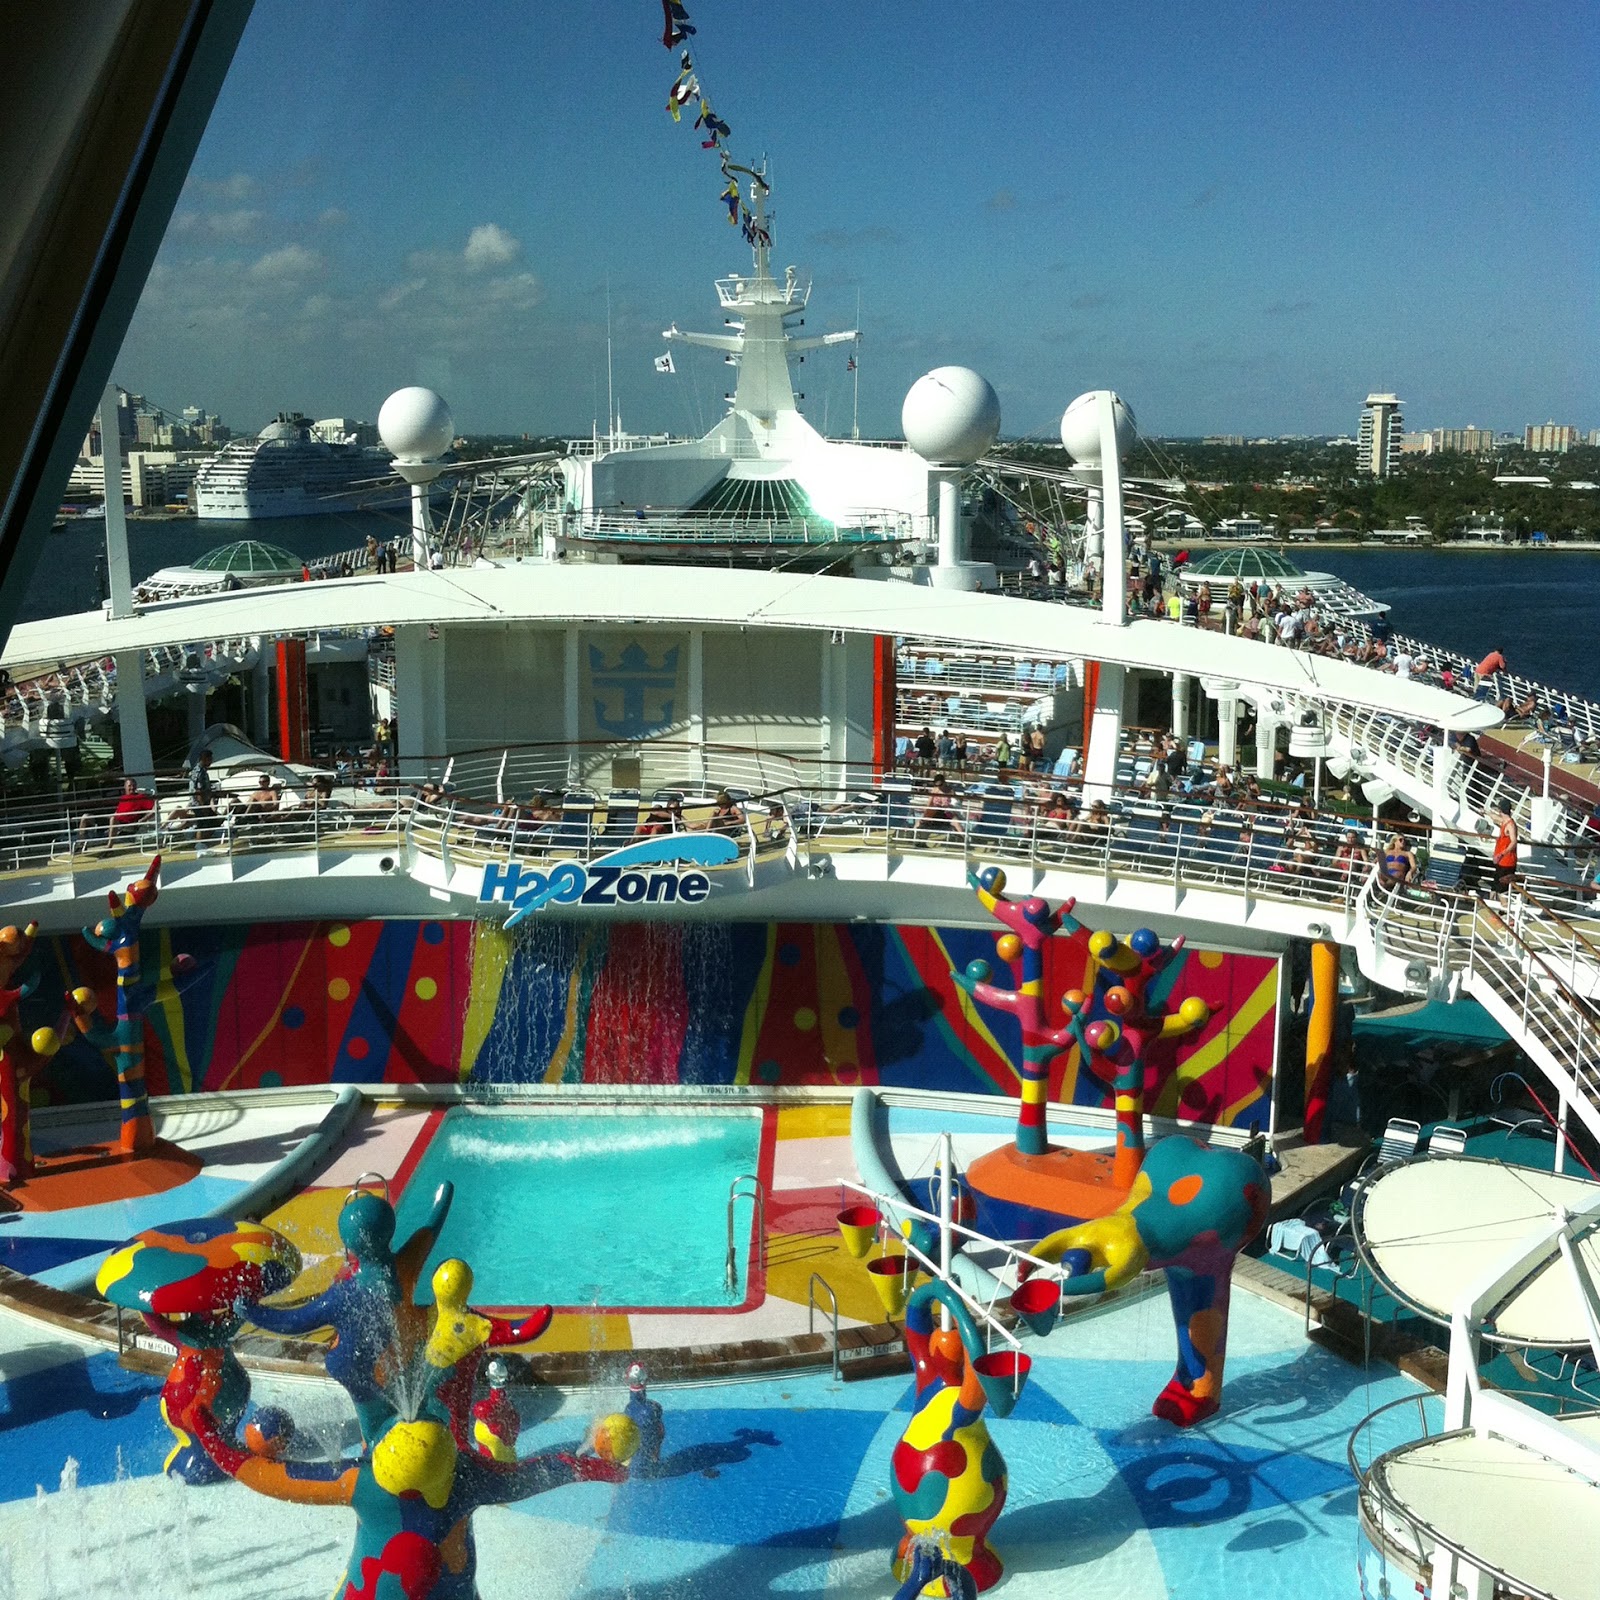 Party of 5: Travel Review: Royal Caribbean 4 Night Cruise on Liberty of